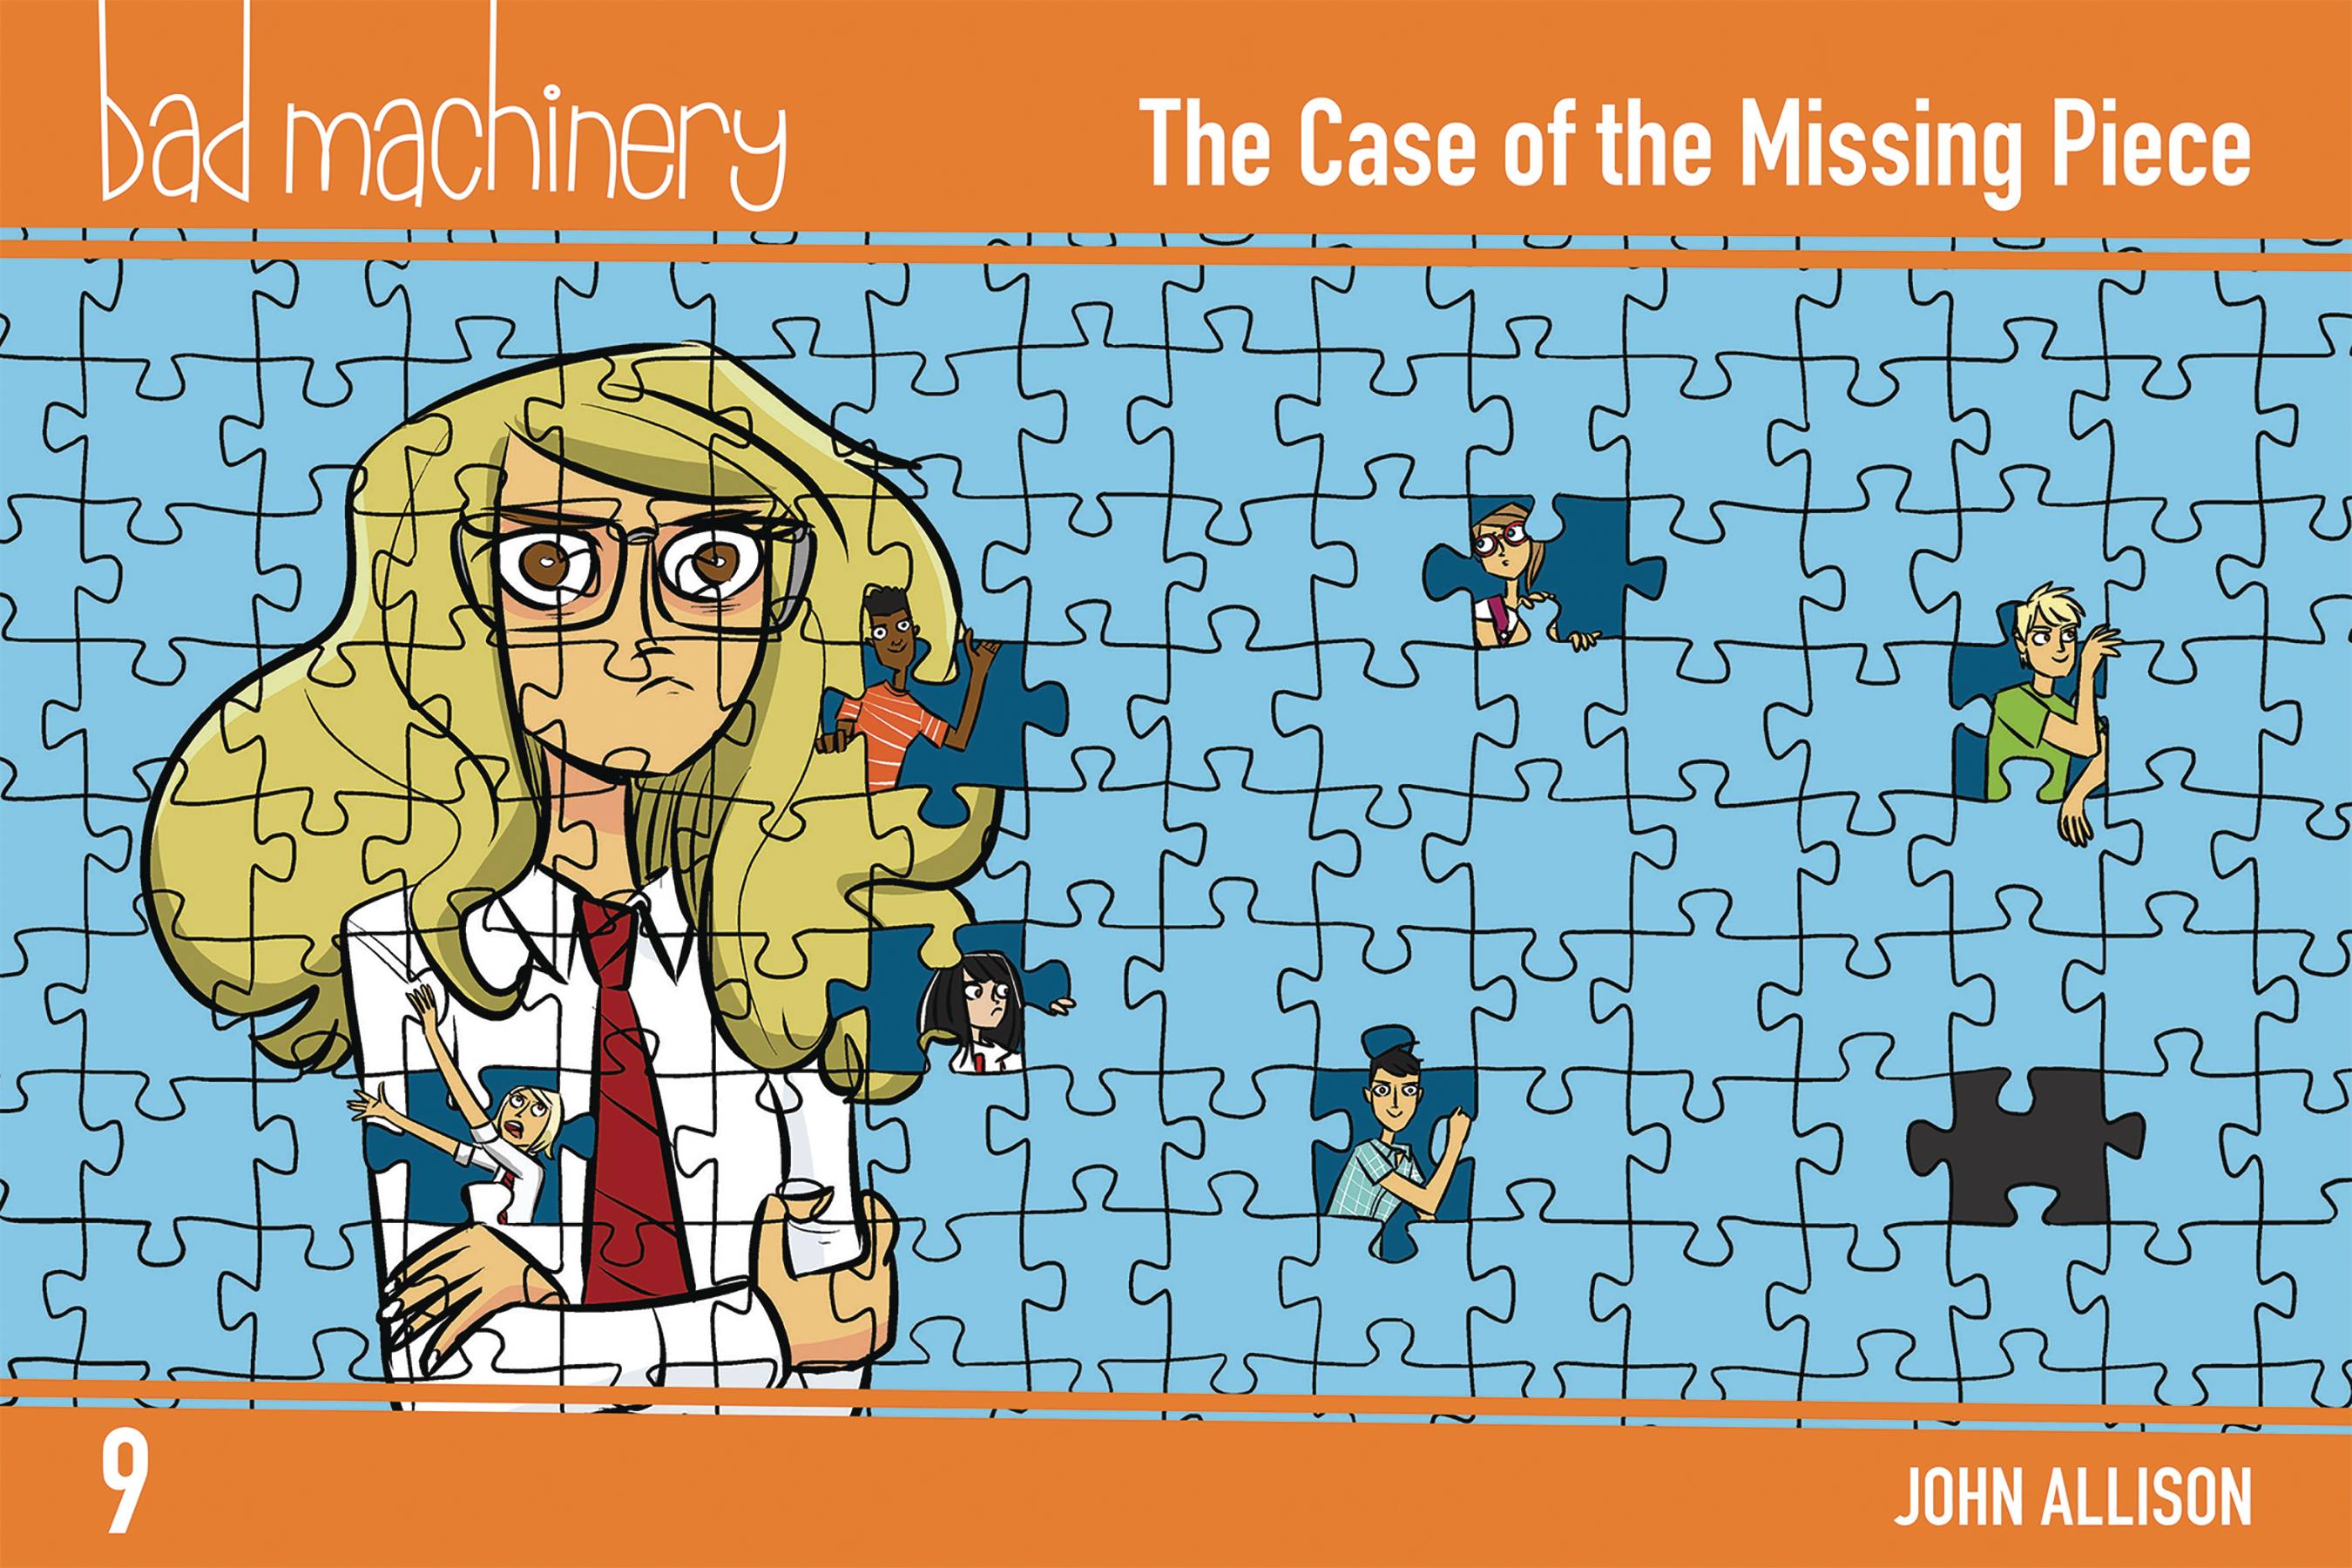 Bad Machinery Pocket Edition Graphic Novel Volume 9 Case of the Missing Piece